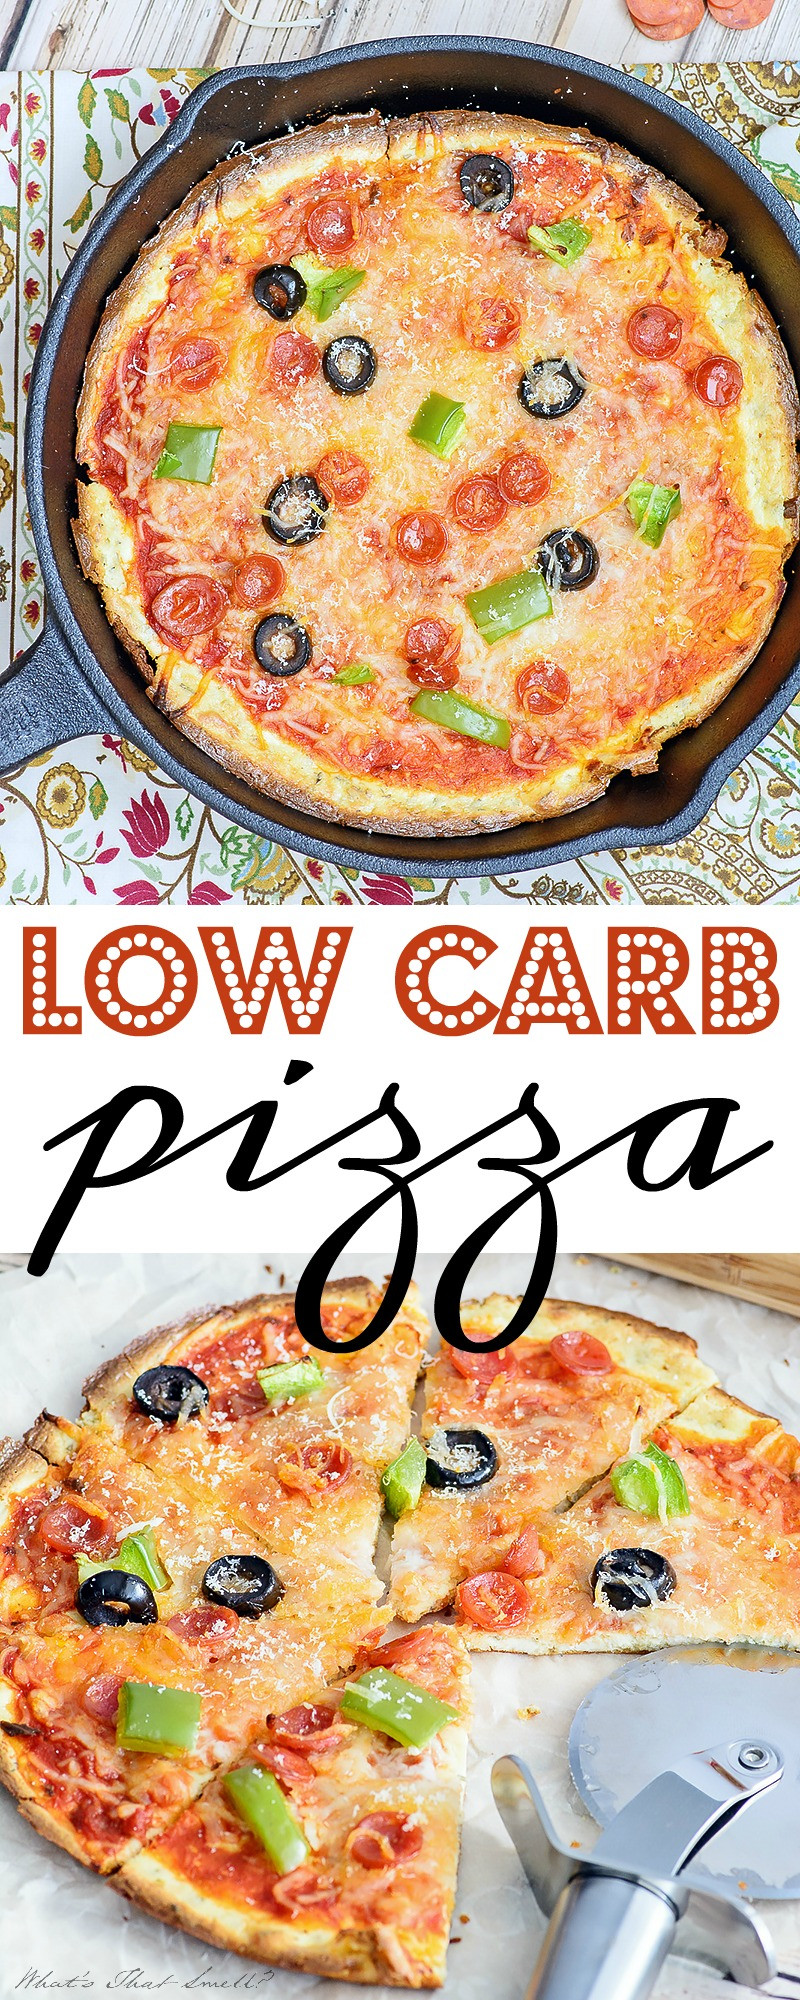 Low Carb Pizza Recipes
 Low Carb Sausage and Egg Breakfast Casserole